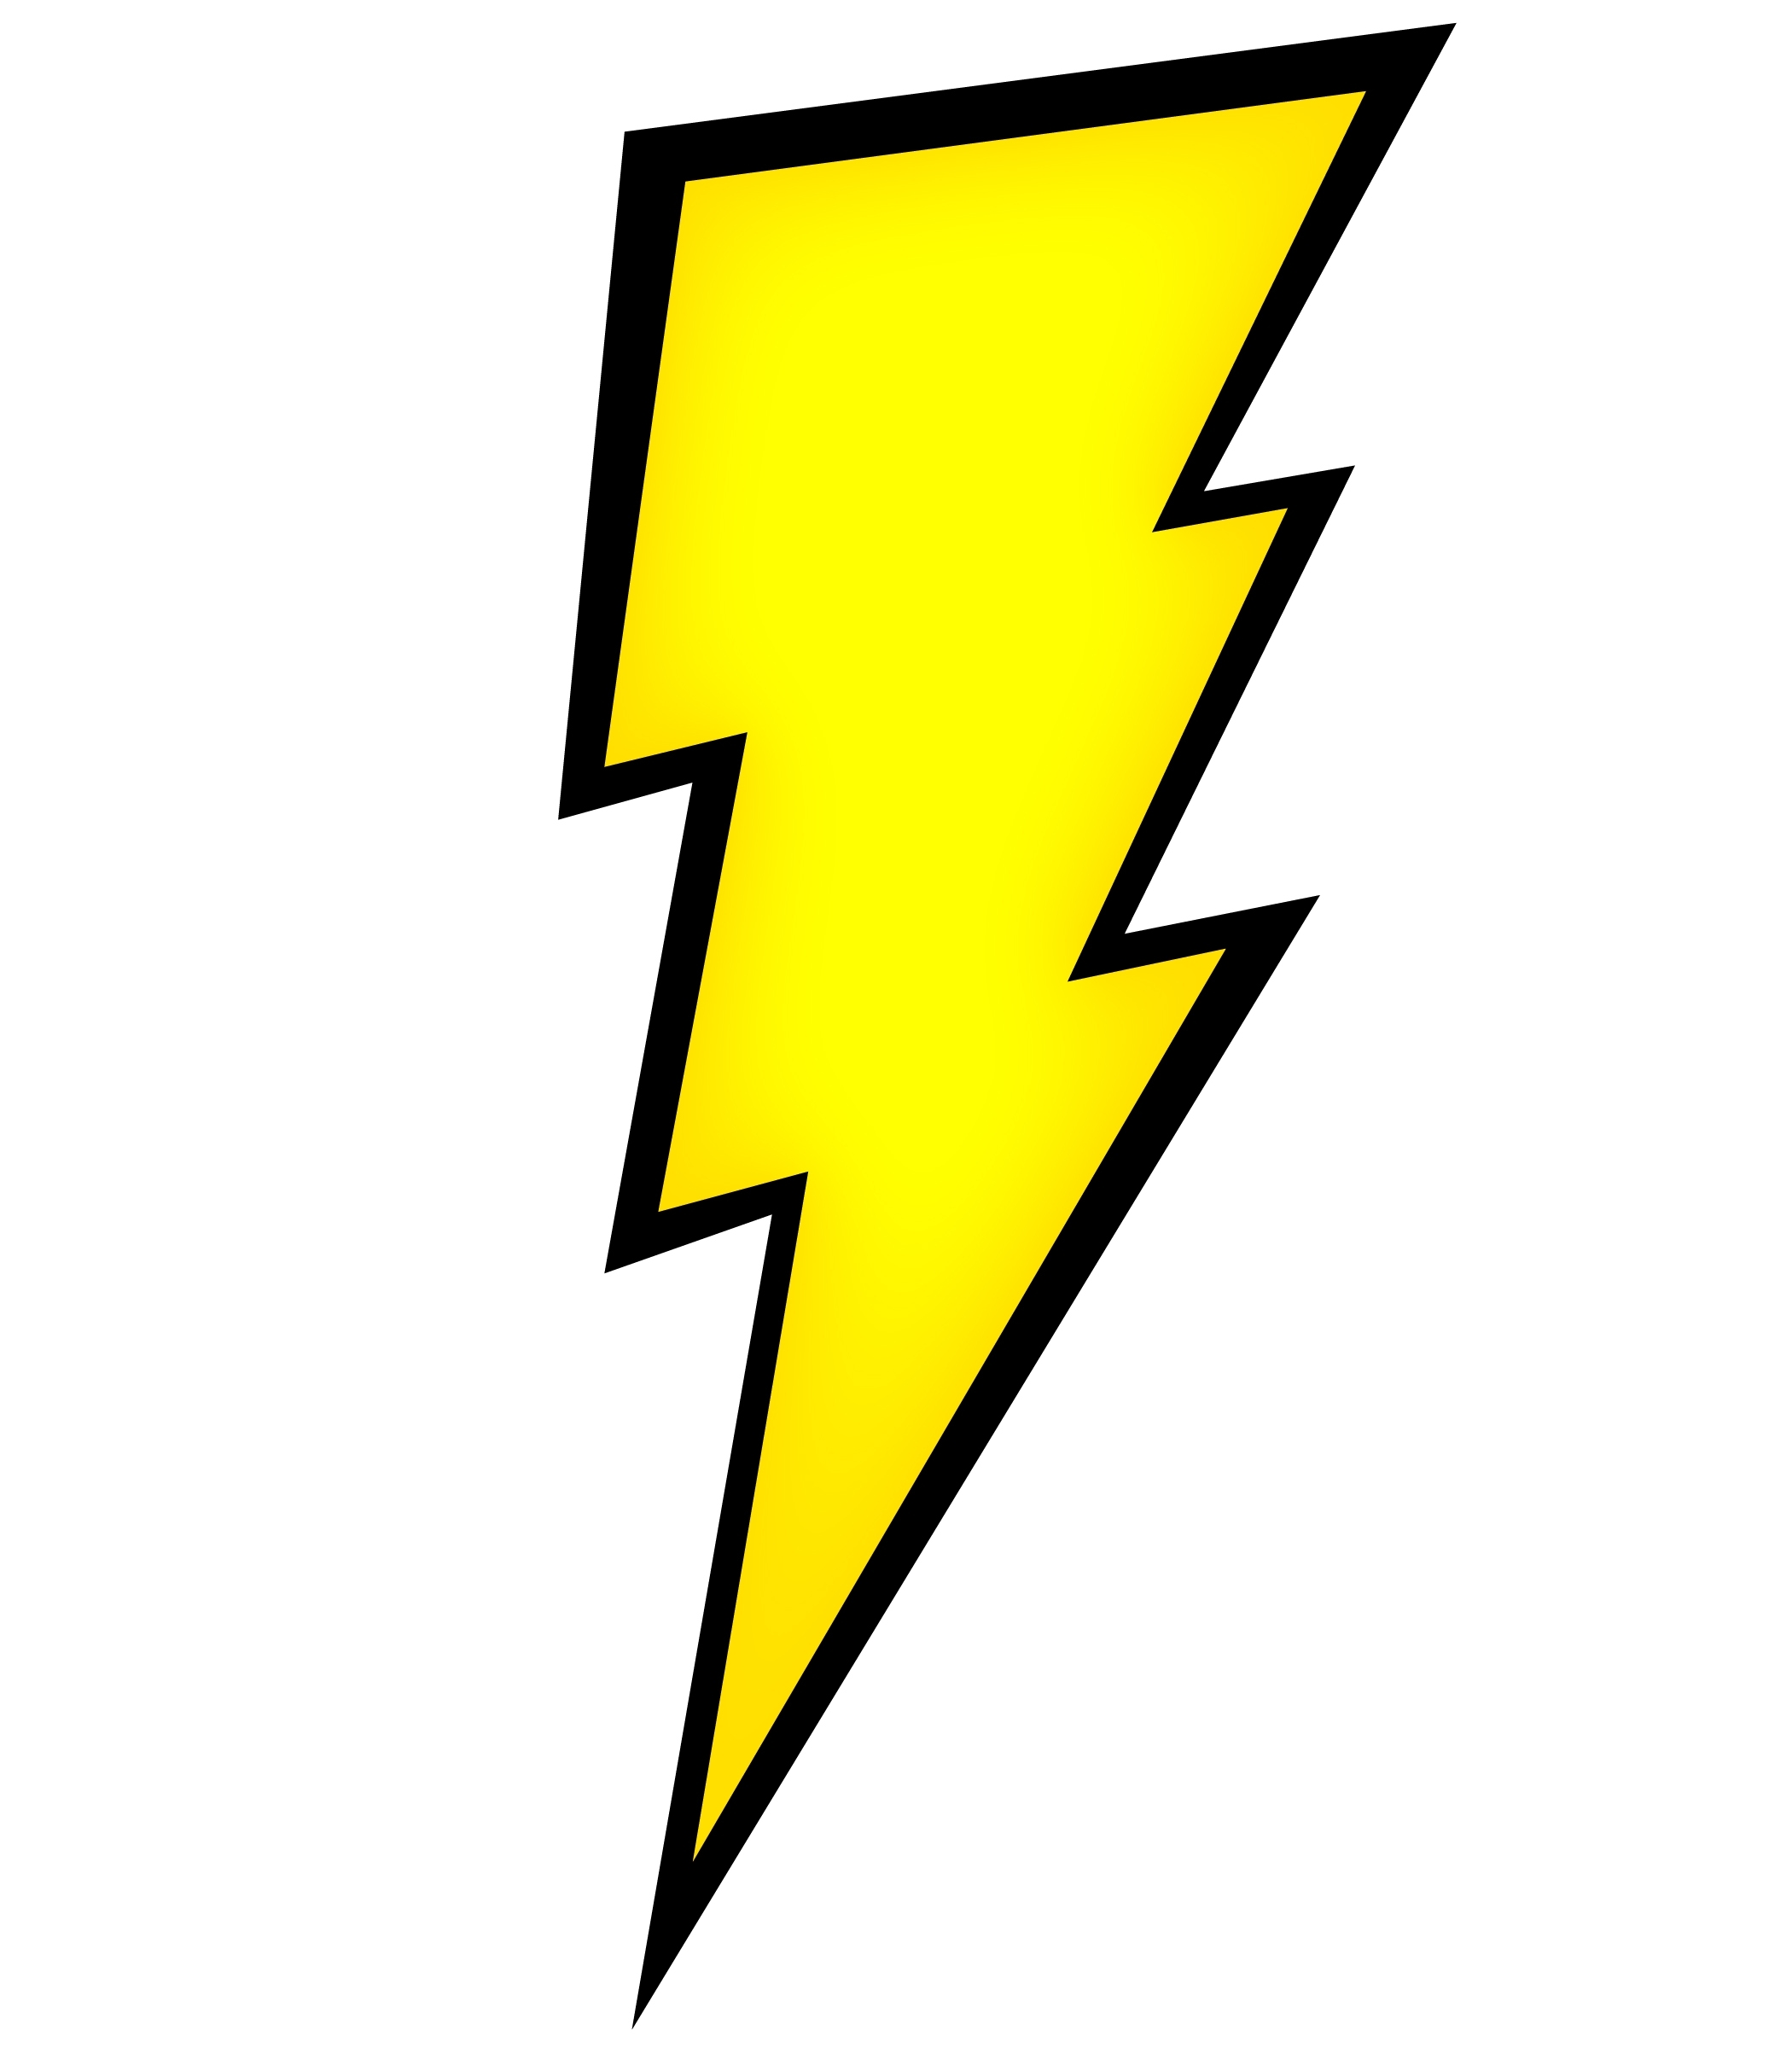 Picture Of A Lightning Bolt - Clipart library